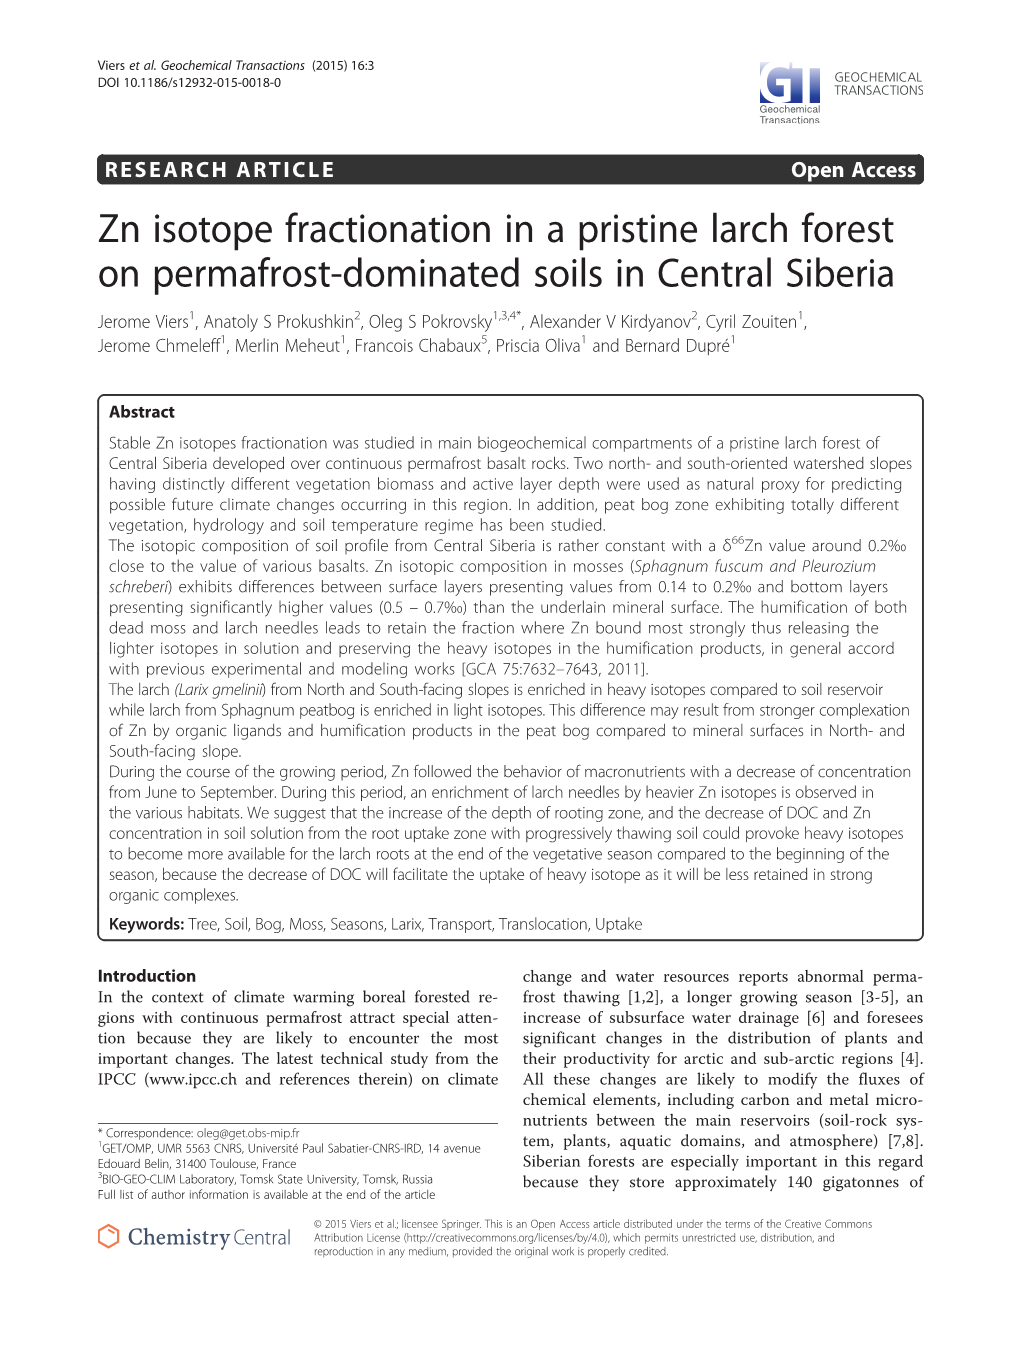 Zn Isotope Fractionation in a Pristine Larch Forest on Permafrost